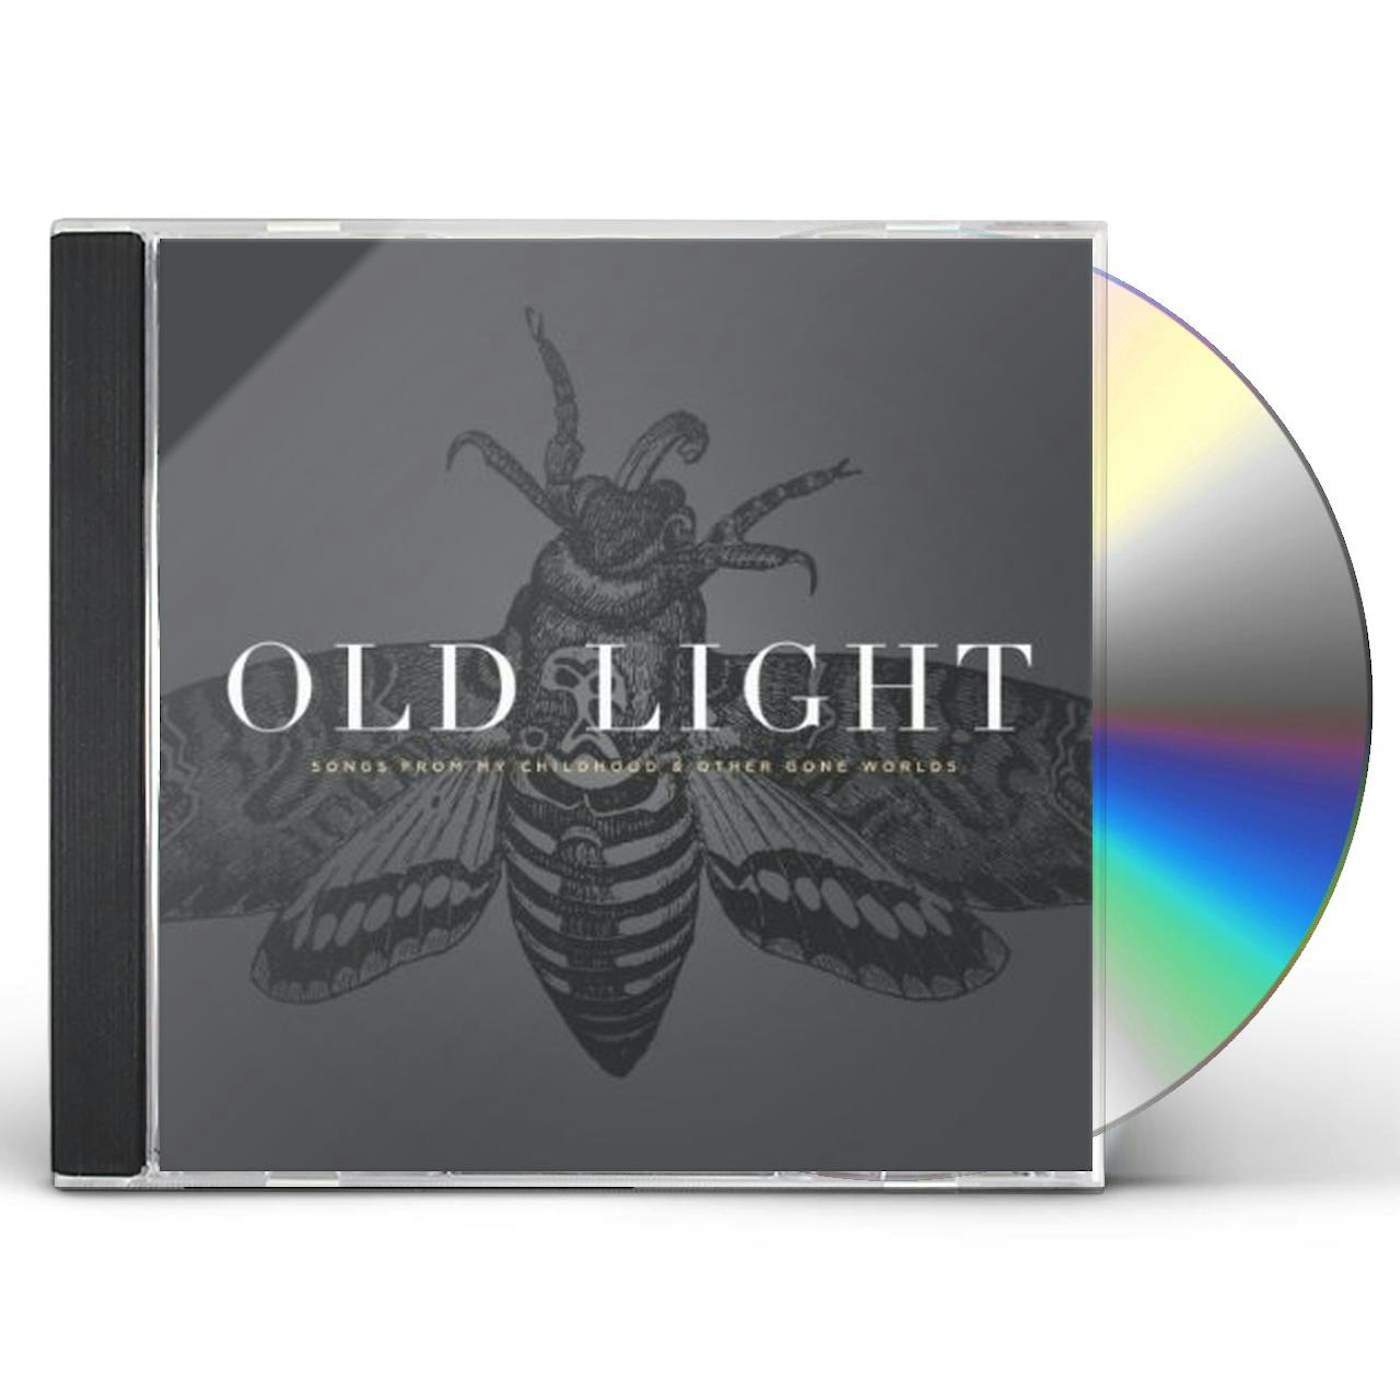 Rayna Gellert OLD LIGHT: SONGS FROM MY CHILDHOOD & OTHER GONE CD